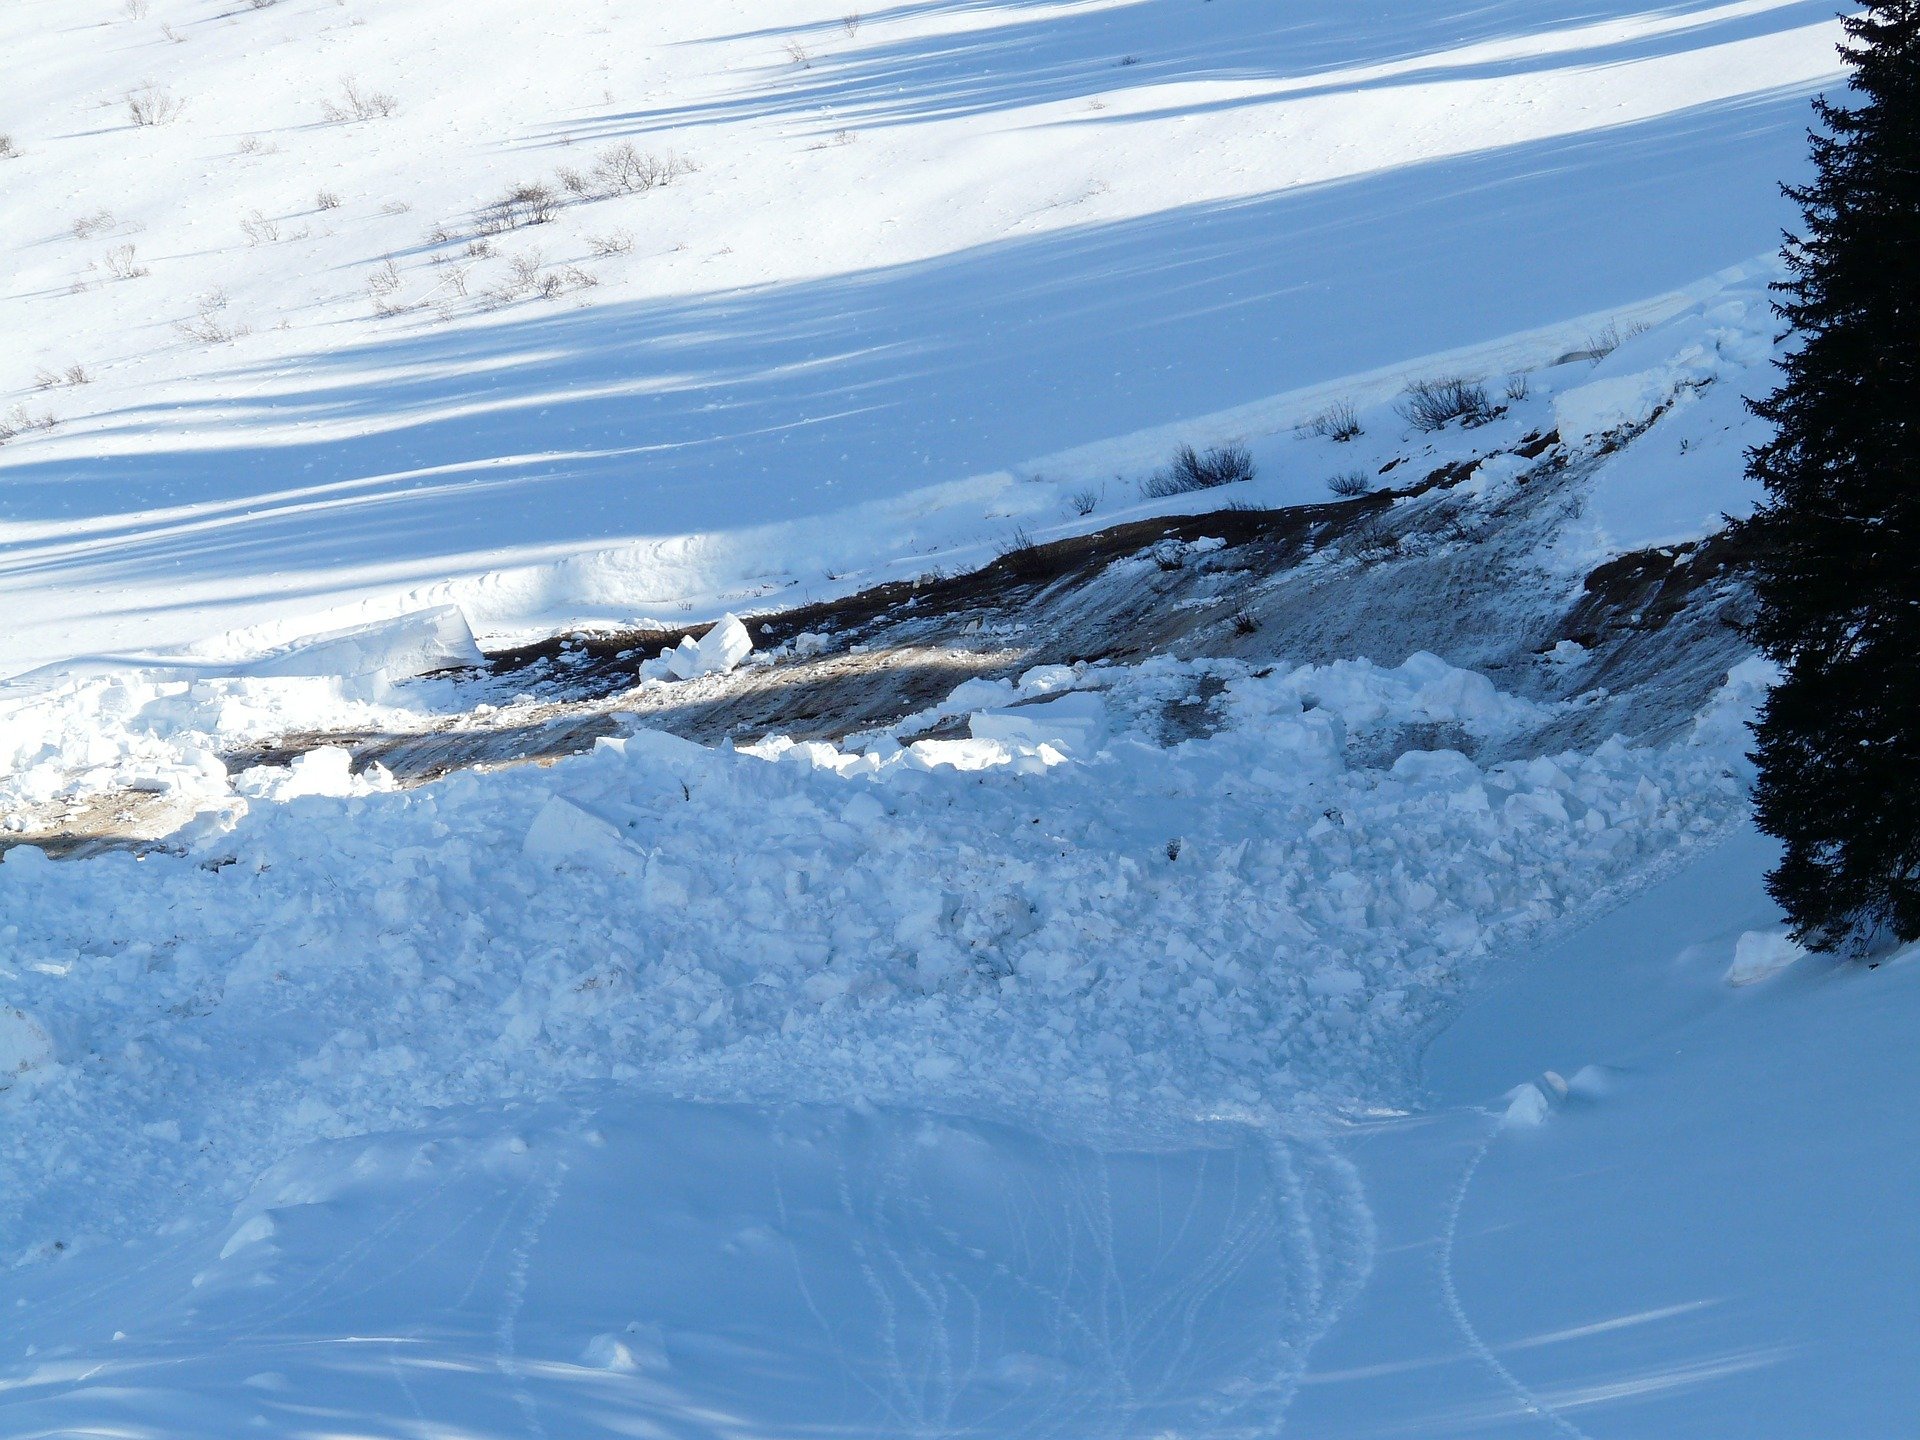 Loose snow avalanches | Source: Pixabay